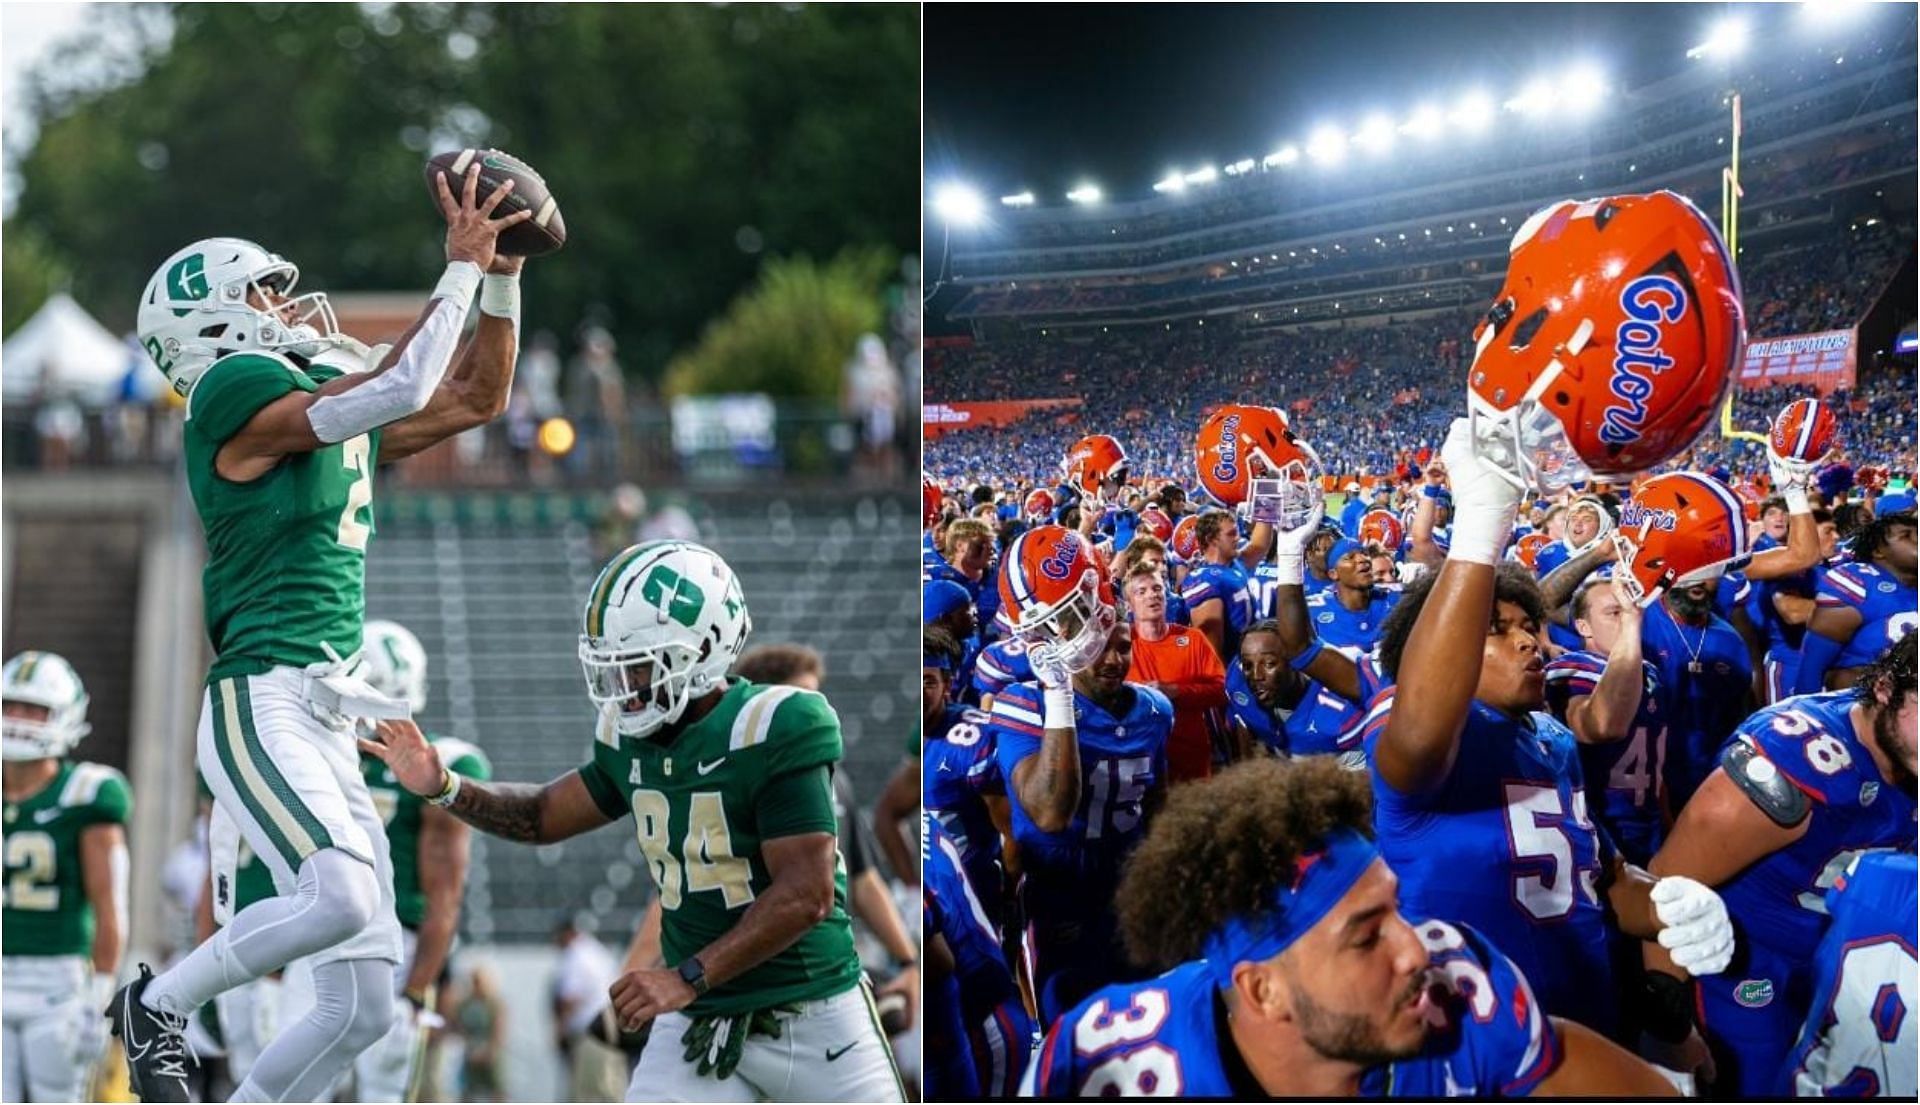 The Charlotte 49ers go against the Florida Gators in Week 4